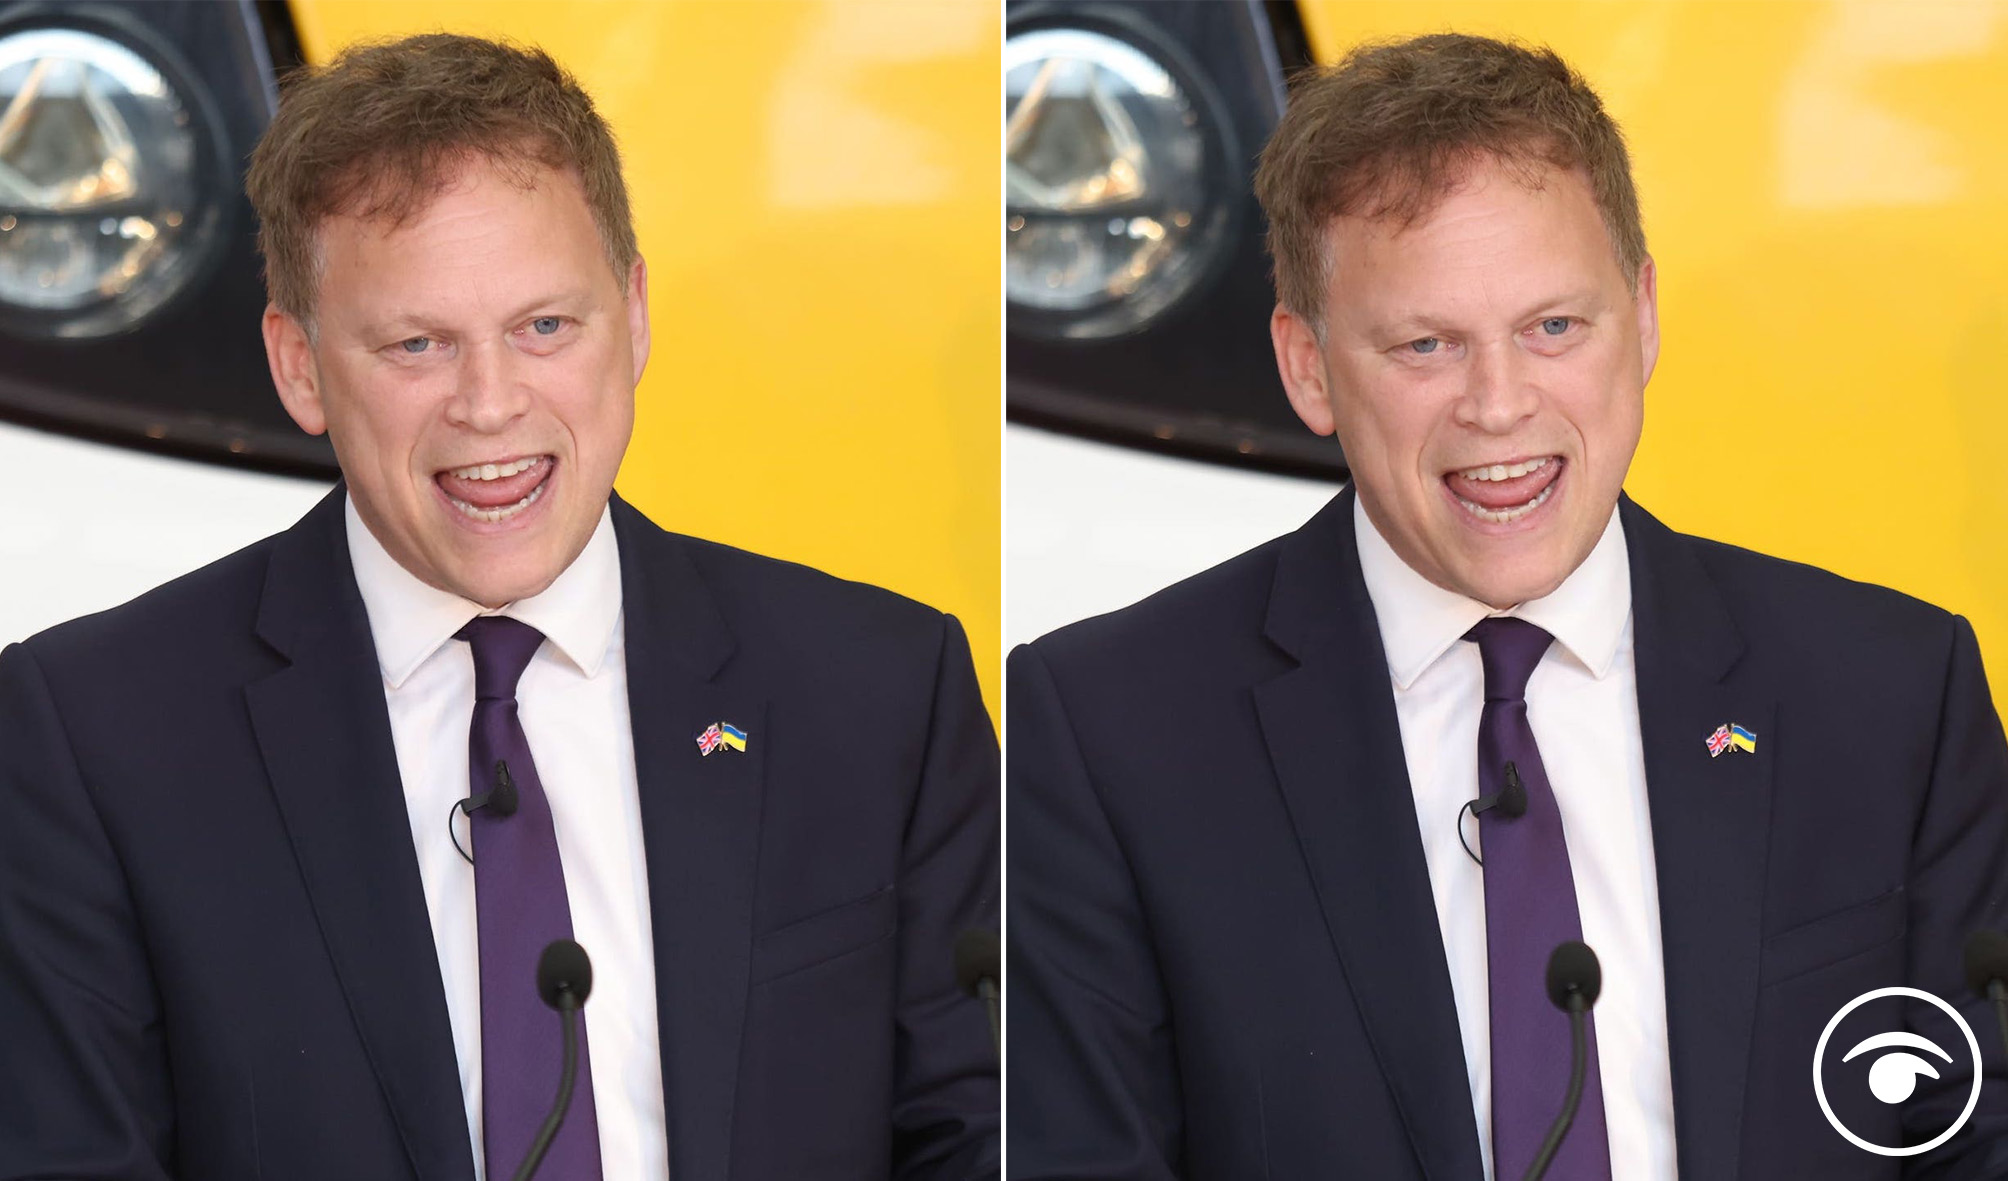 Grant Shapps may stand for PM and the jokes wrote themselves as top contender emerges